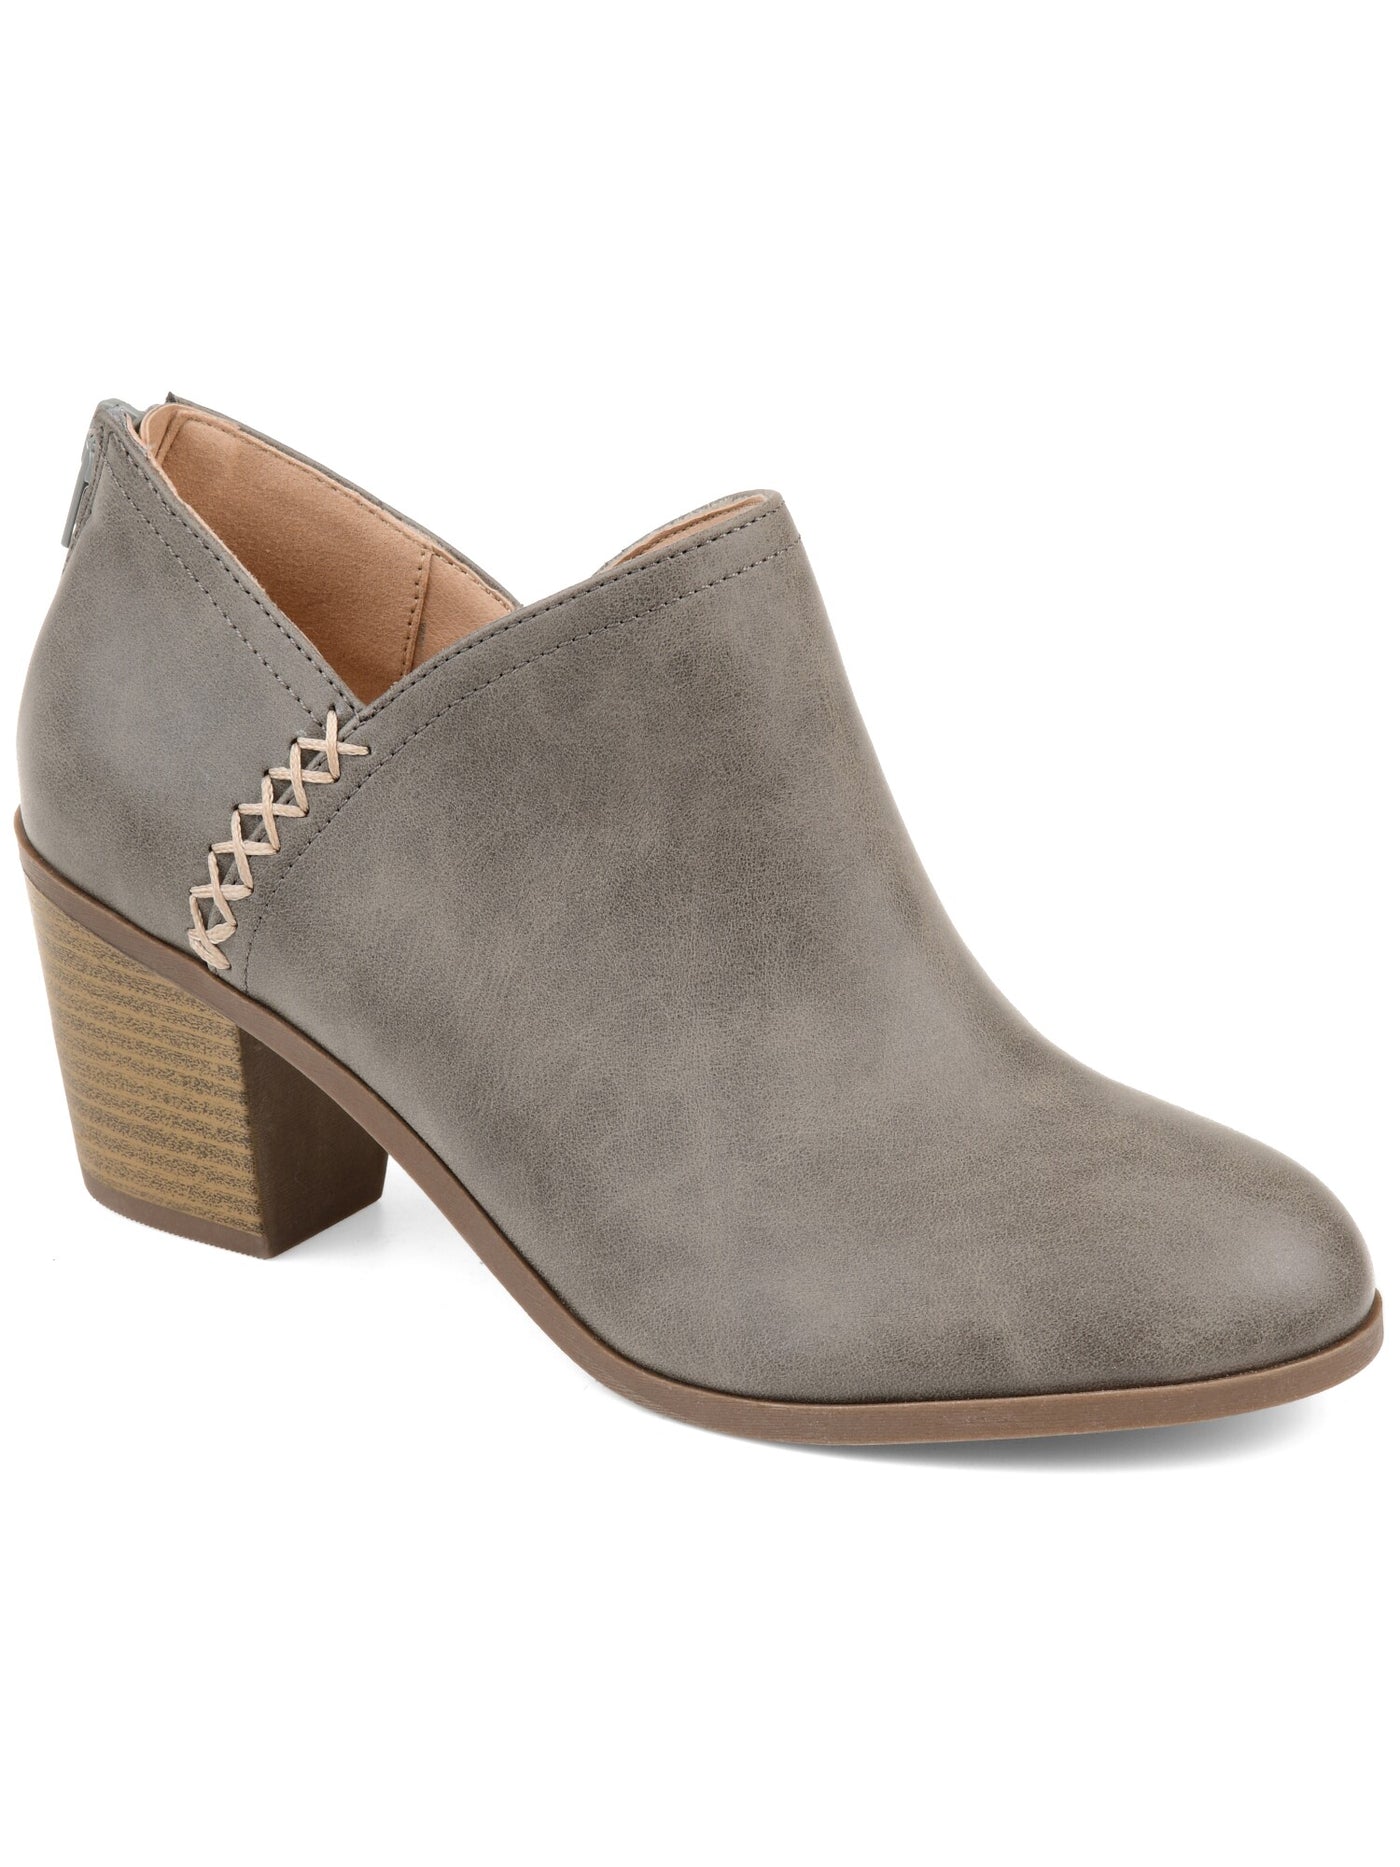 JOURNEE COLLECTION Womens Gray Low Cut Ankle Cushioned Manda Round Toe Block Heel Zip-Up Booties 7.5 M